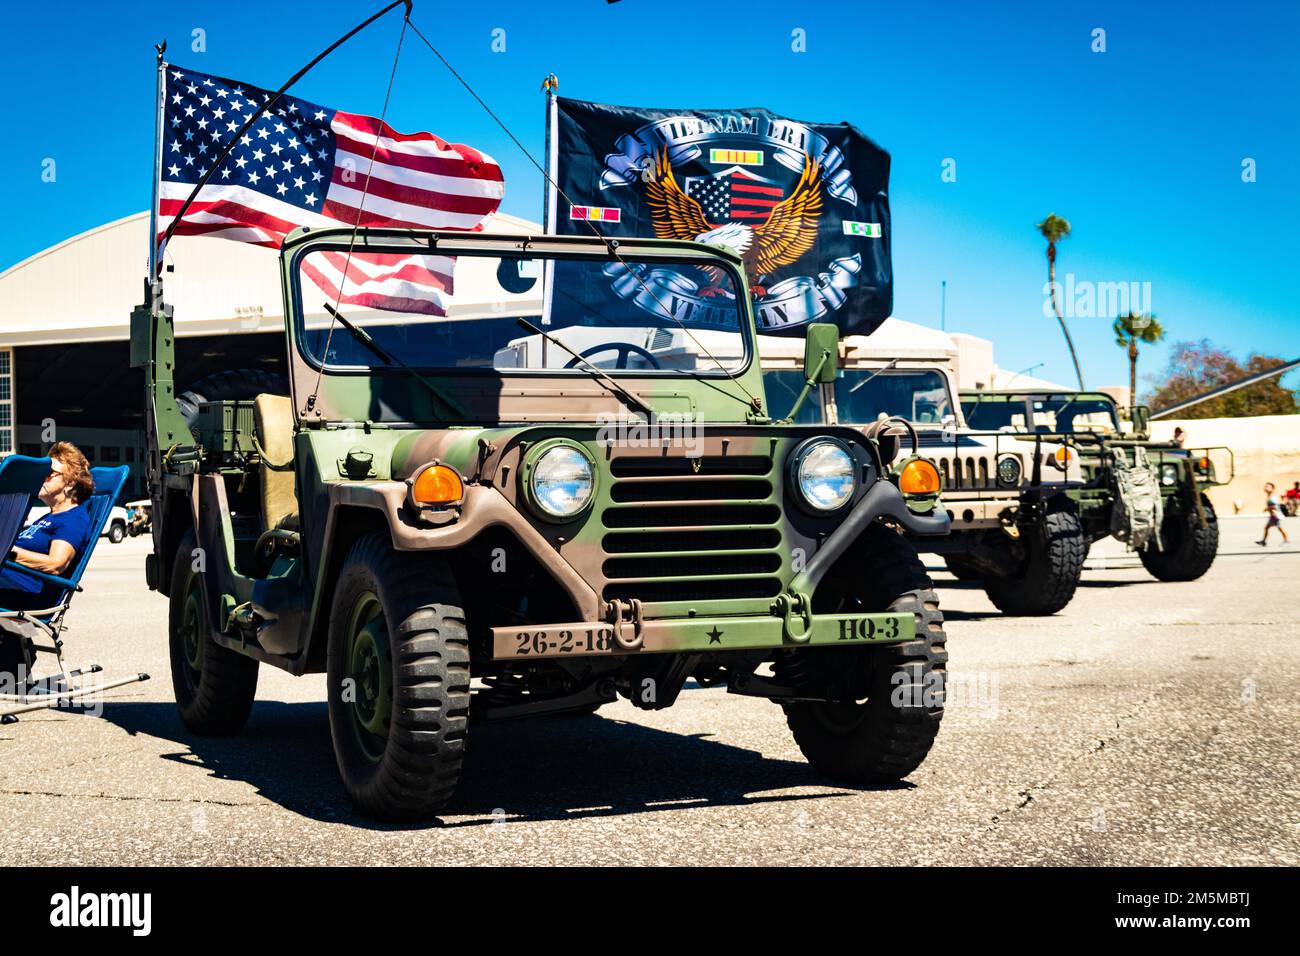 Flags flutter atop a World War II era jeep that resides next to a pair of Humvees – the jeep’s successor – during the Tampa Bay Airfest held March 25, 2022, at MacDill Air Force Base, Florida. The First Florida Chapter of the Military Vehicle Preservation Association displayed the jeep, Humvees and other U.S. Army historical vehicles and equipment at the Airfest’s Army Village. The Army Village’s static displays and interactive exhibits attracted thousands of visitors to the Army Village, where dozens of Soldiers from various branches, components and Military Occupation Specialties share their Stock Photo